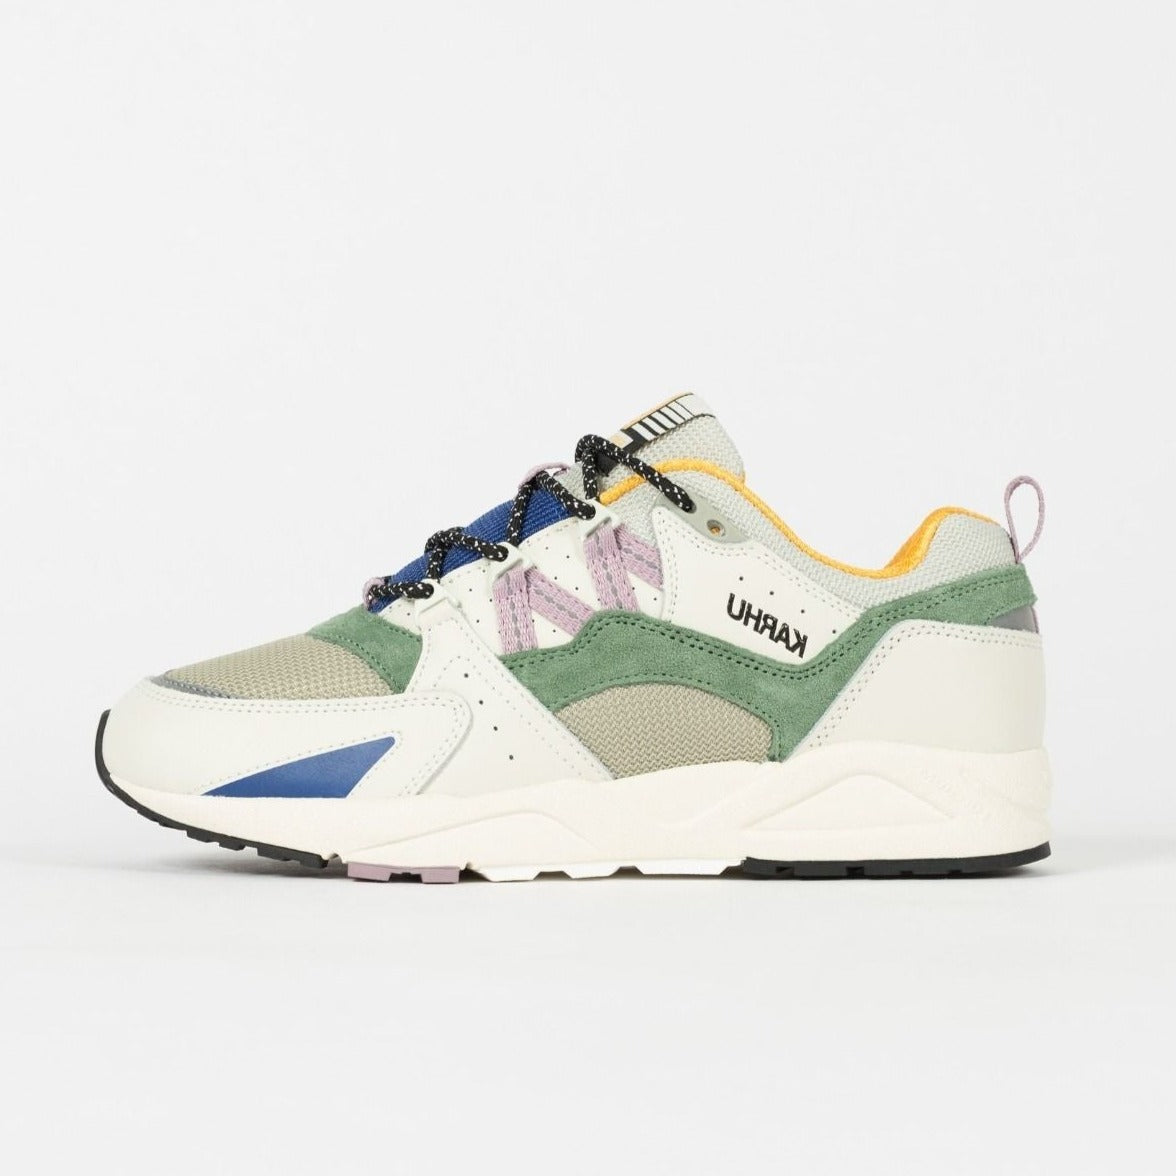 Karhu Fusion 2.0 Lily White/Loden Frost